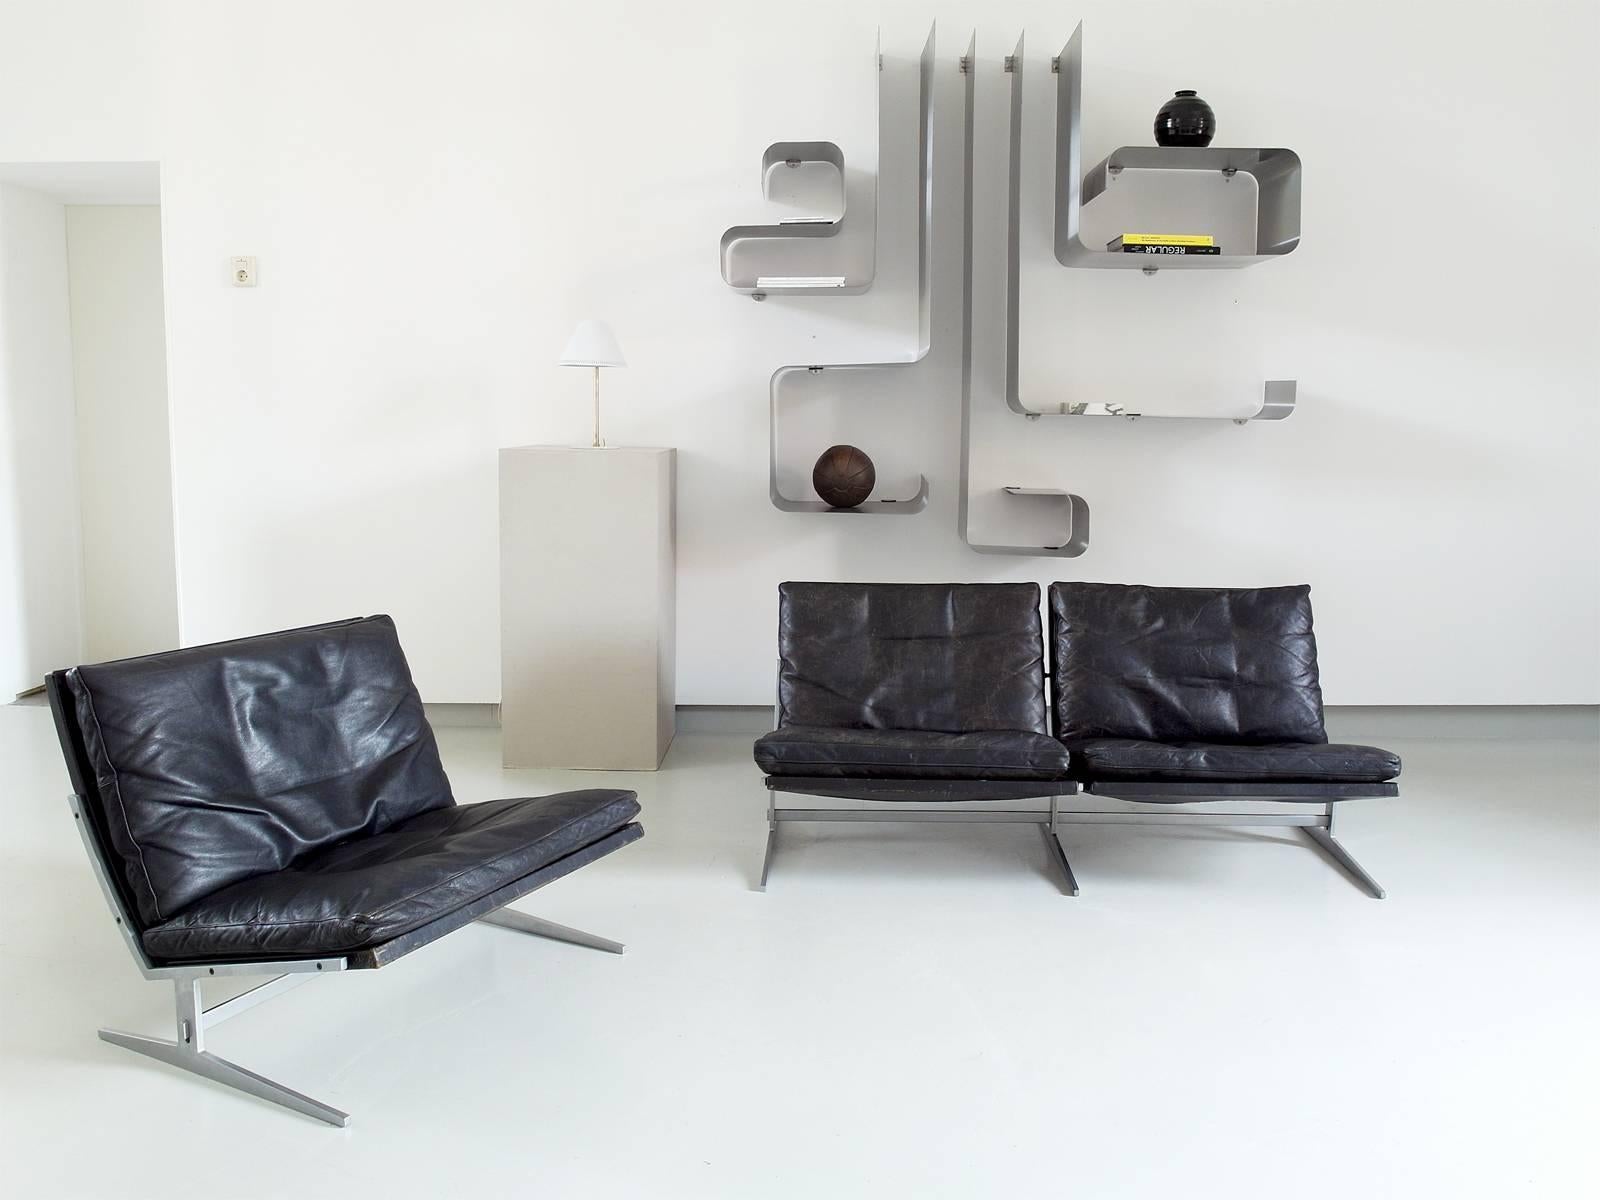 Lounge chair model BO561 in brushed steel and black leather, designed by Preben Fabricius and Jørgen Kastholm, manufactured by Bo-Ex, Denmark 1962. 

Designed in 1962, this BO561 lounge chair remains an extraordinary modern and desirable piece.